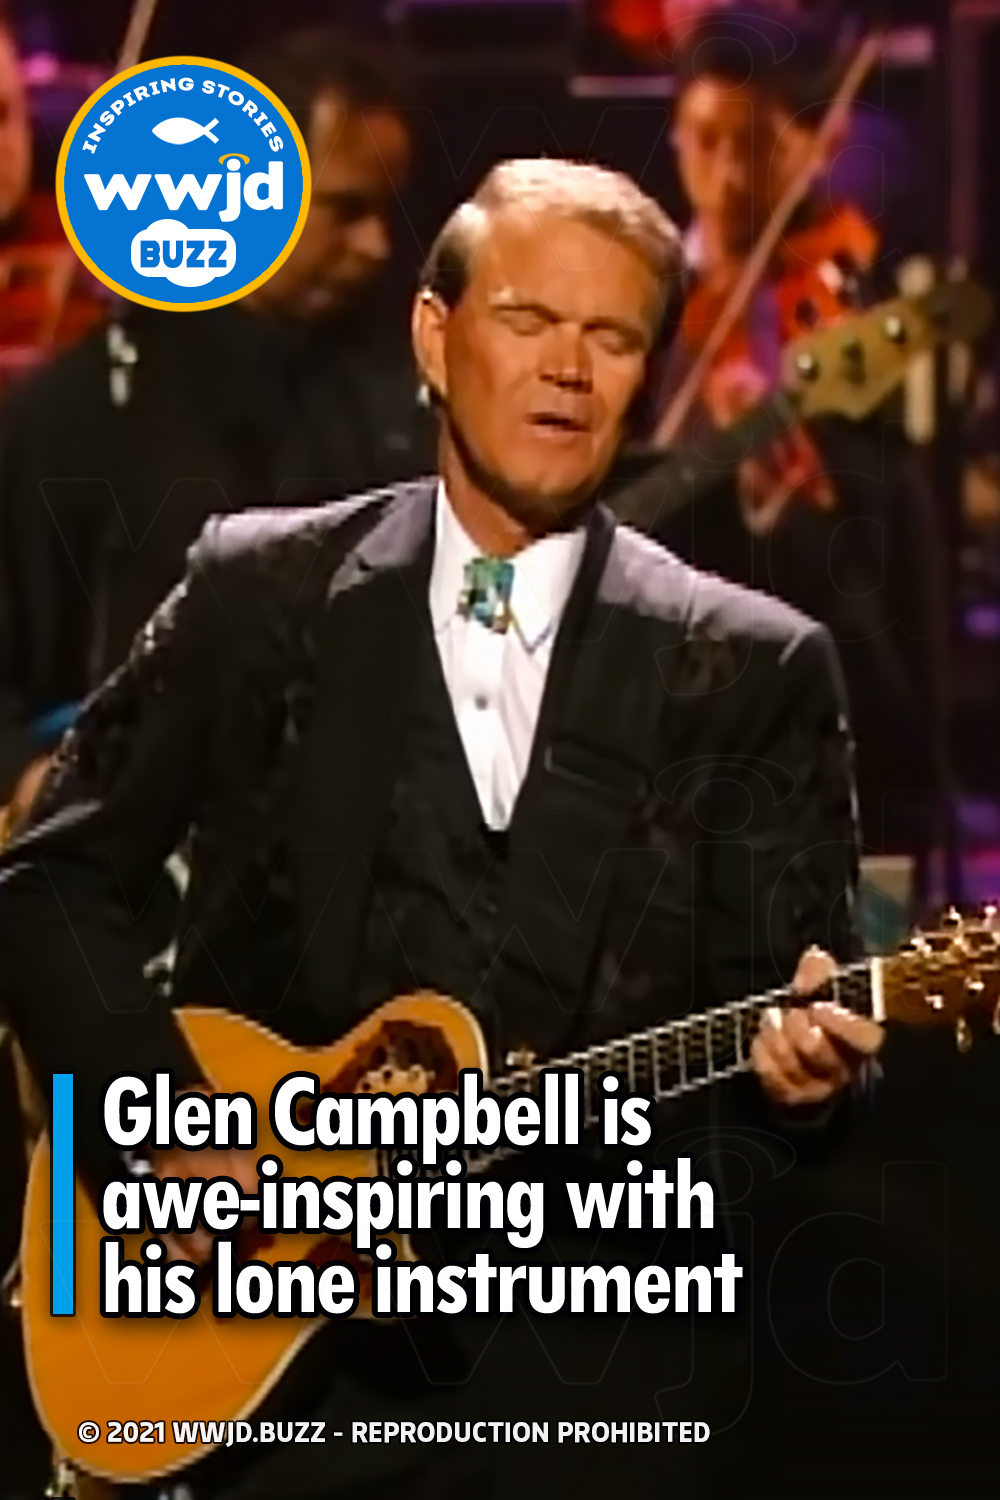 Glen Campbell is awe-inspiring with his lone instrument